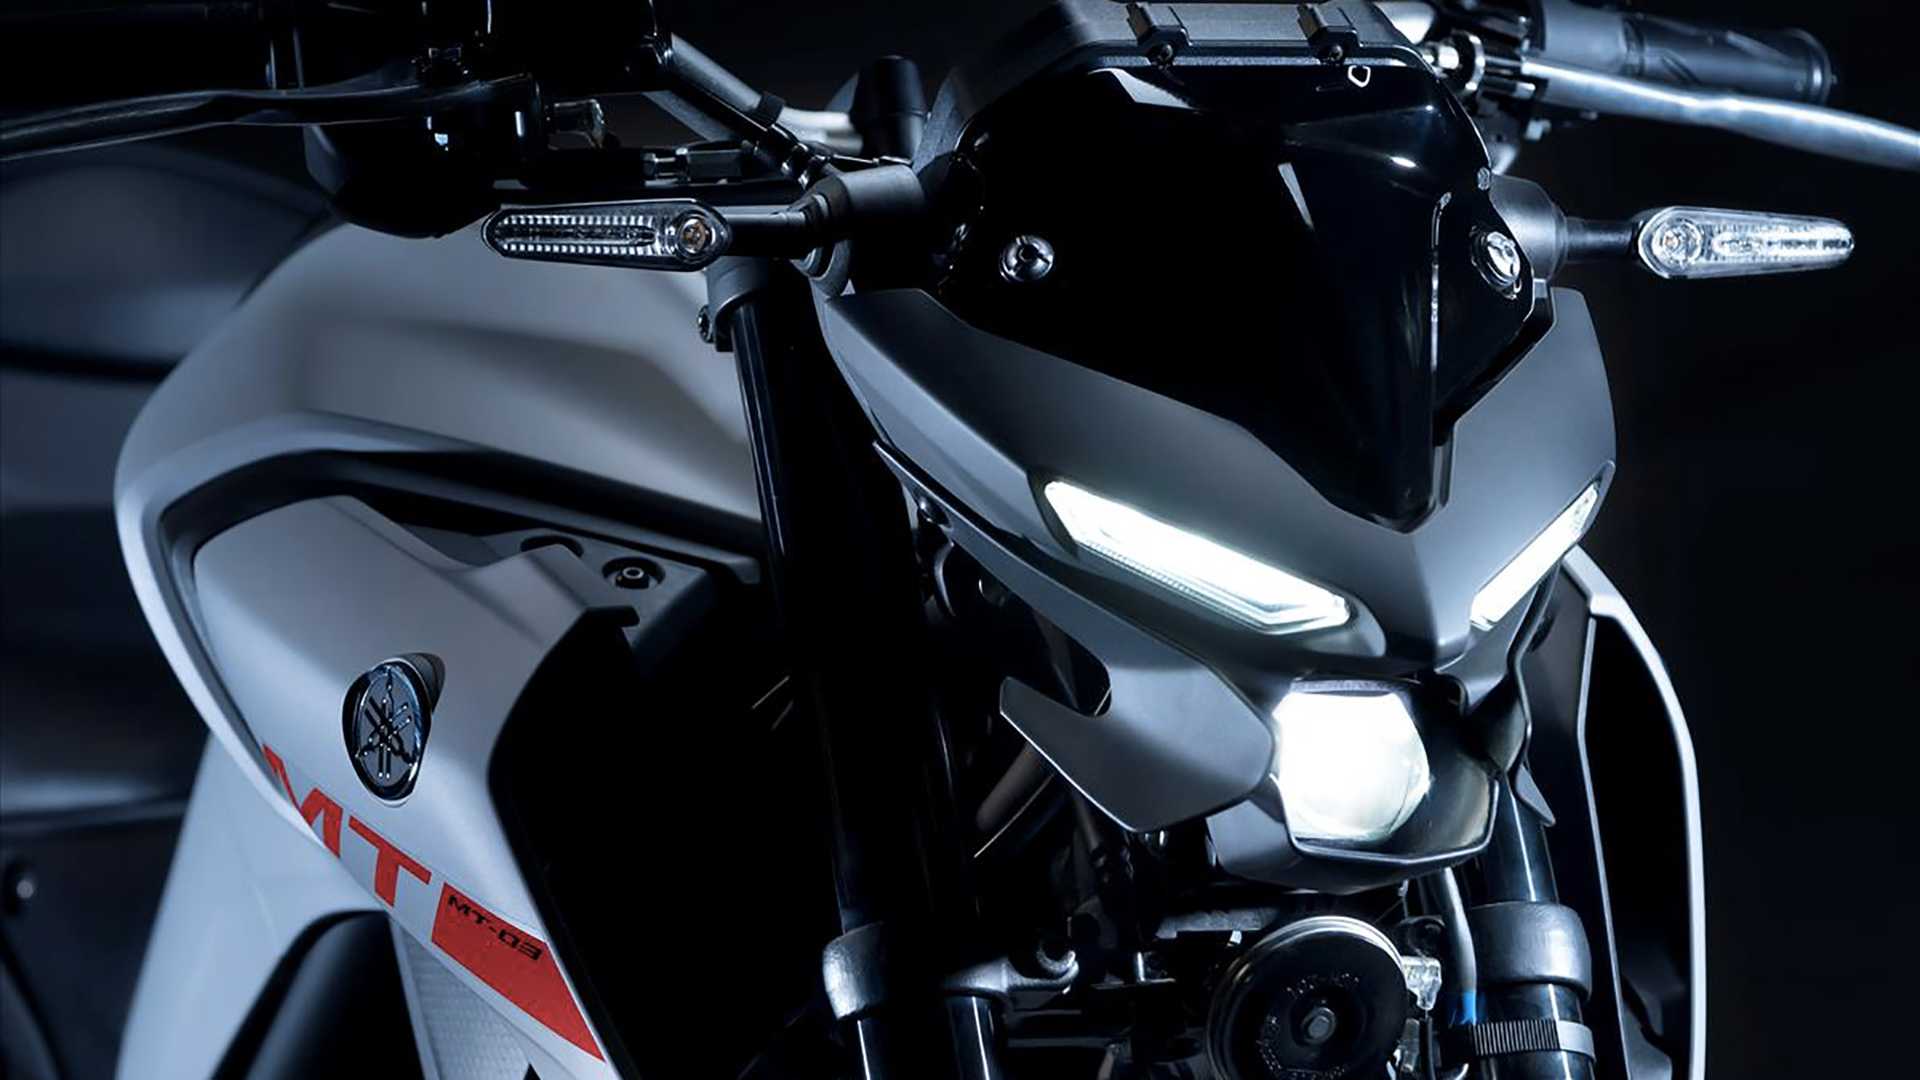 New 2020 Yamaha MT 03 Unveiled And Coming Stateside